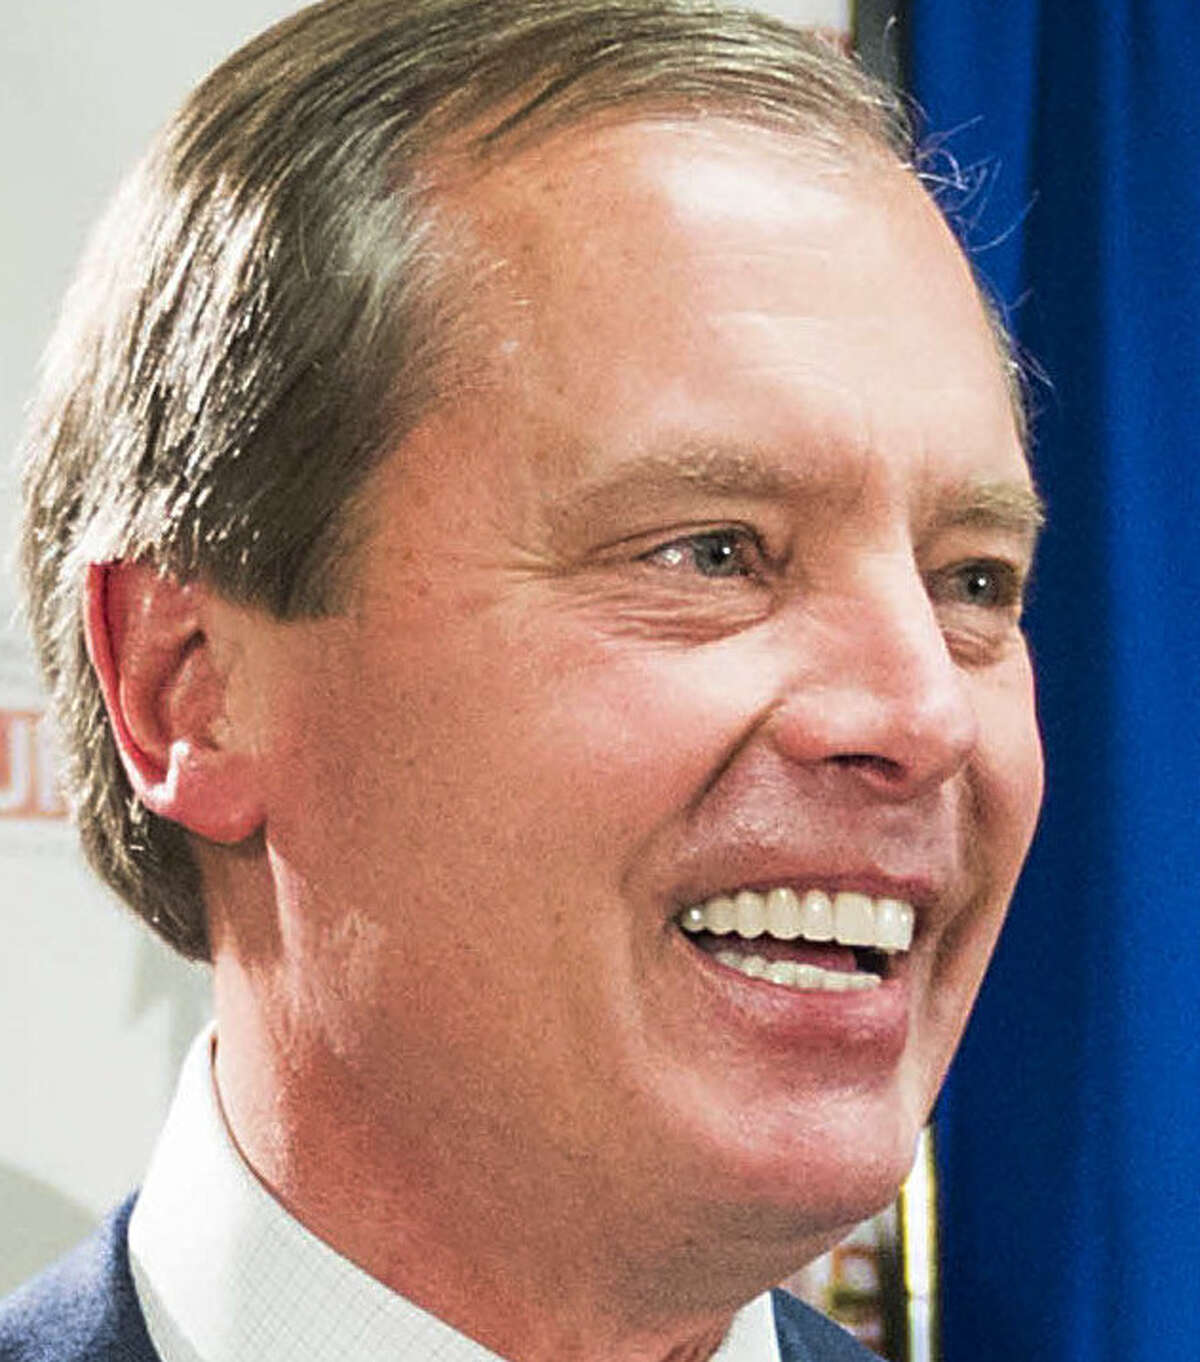 Experts see the only positive outcome for David Dewhurst in the GOP runoff is in going negative.